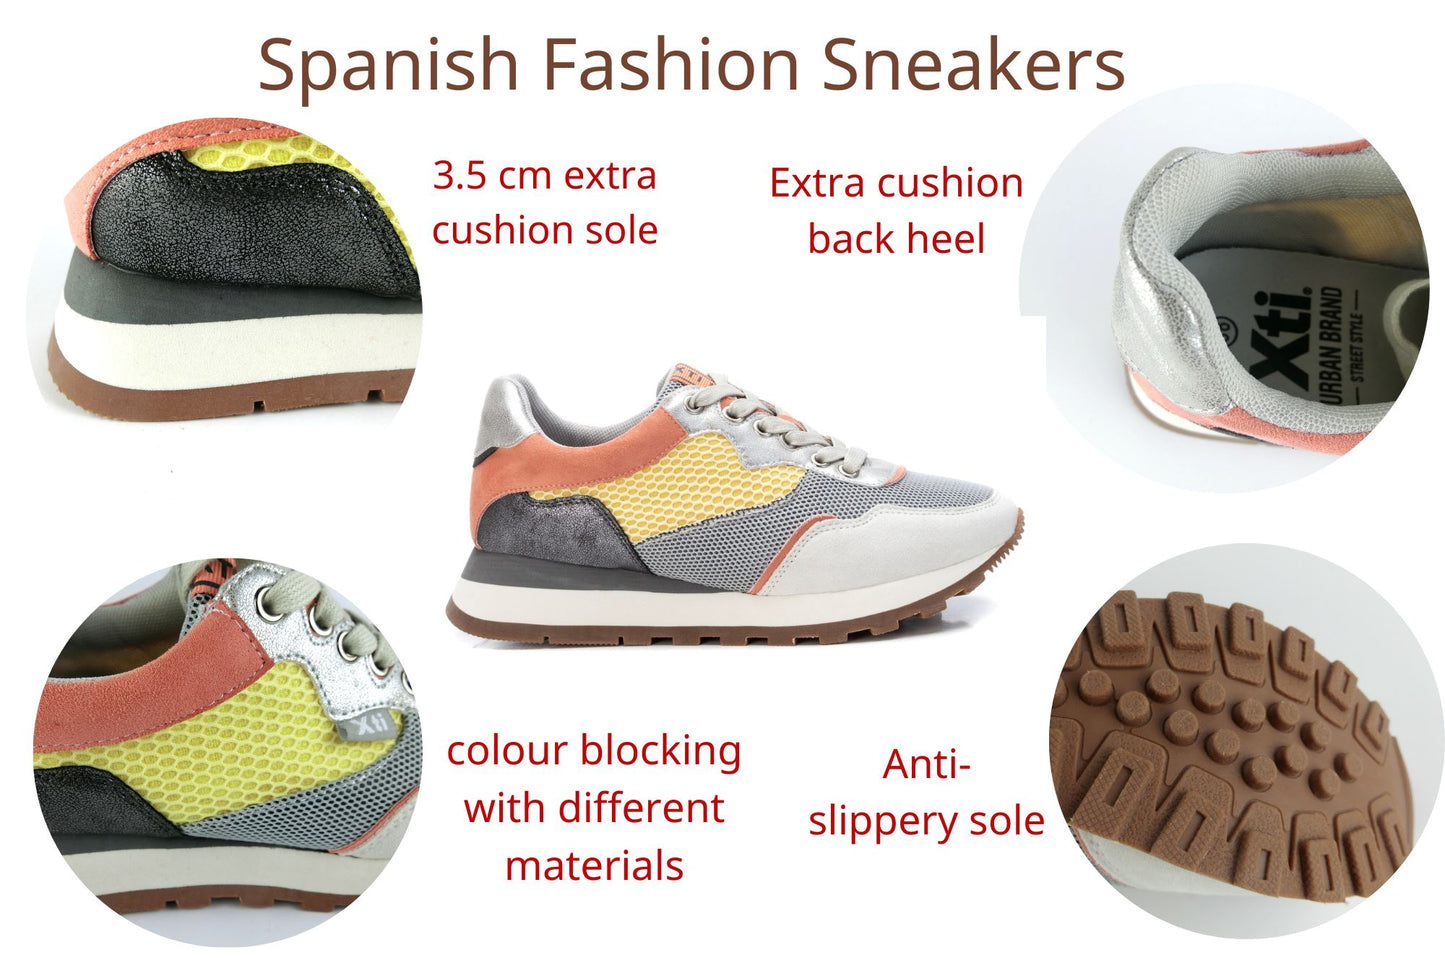 44324 Spanish Collection Fashion sneakers in multi colour blocking sneakers Sam Star shoes 